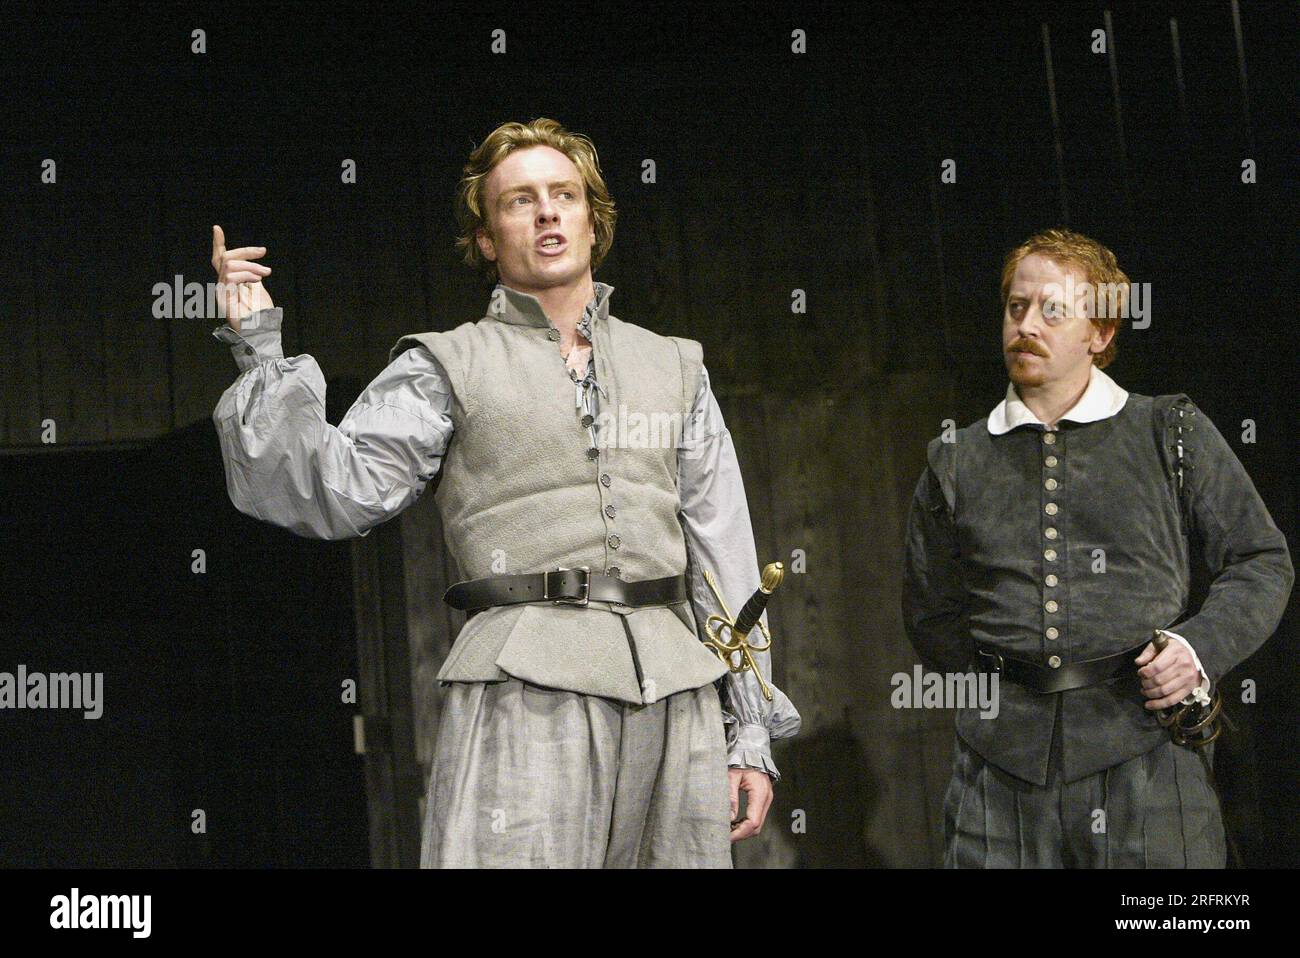 l-r: Toby Stephens (Hamlet), Forbes Masson (Horatio) in HAMLET by Shakespeare at the Royal Shakespeare Company (RSC), Royal Shakespeare Theatre, Stratford-upon-Avon, England  21/07/2004  design: Tom Piper  lighting: Vince Herbert  director: Michael Boyd Stock Photo